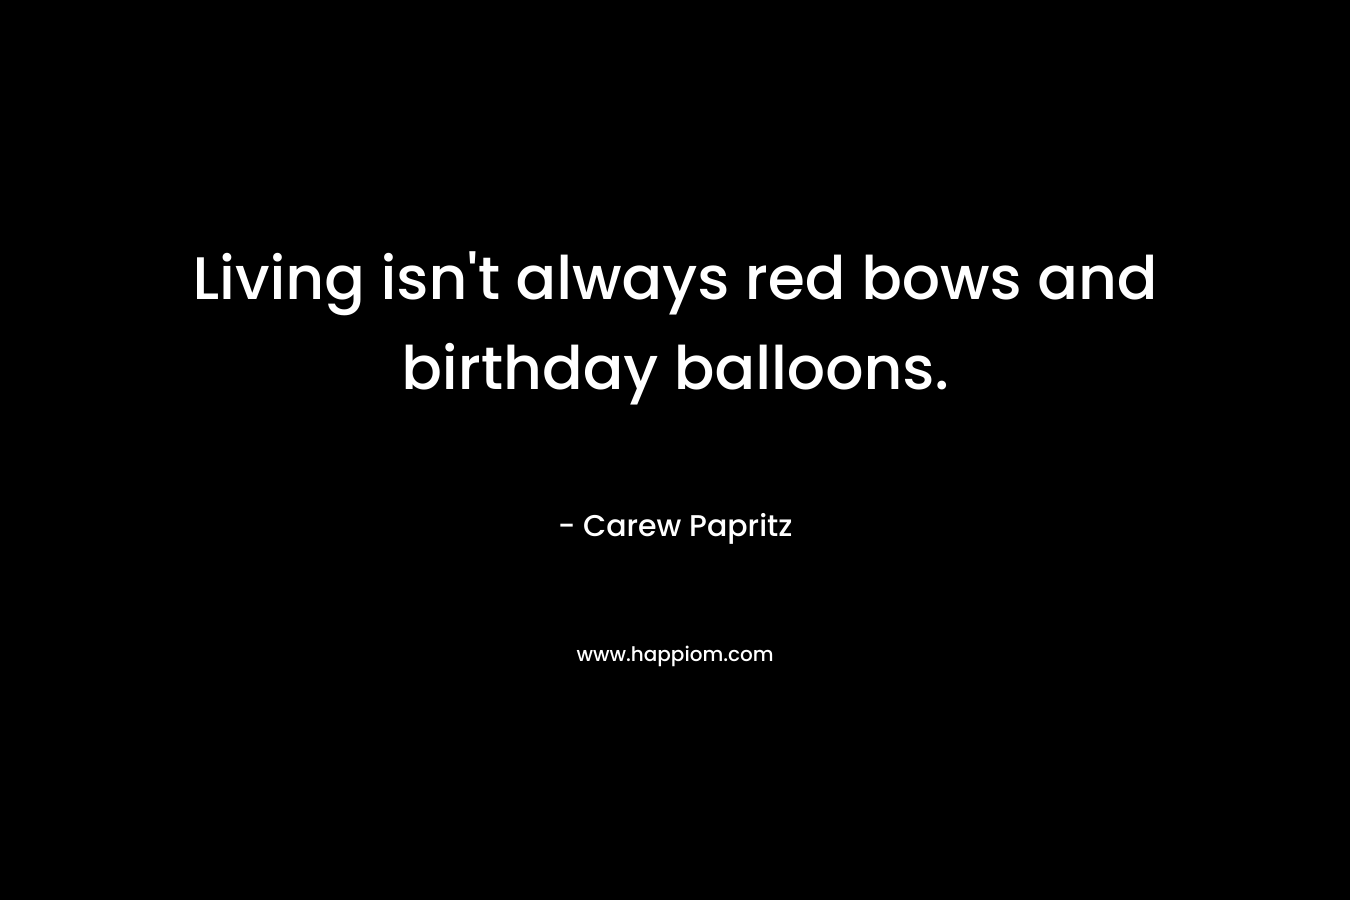 Living isn't always red bows and birthday balloons.